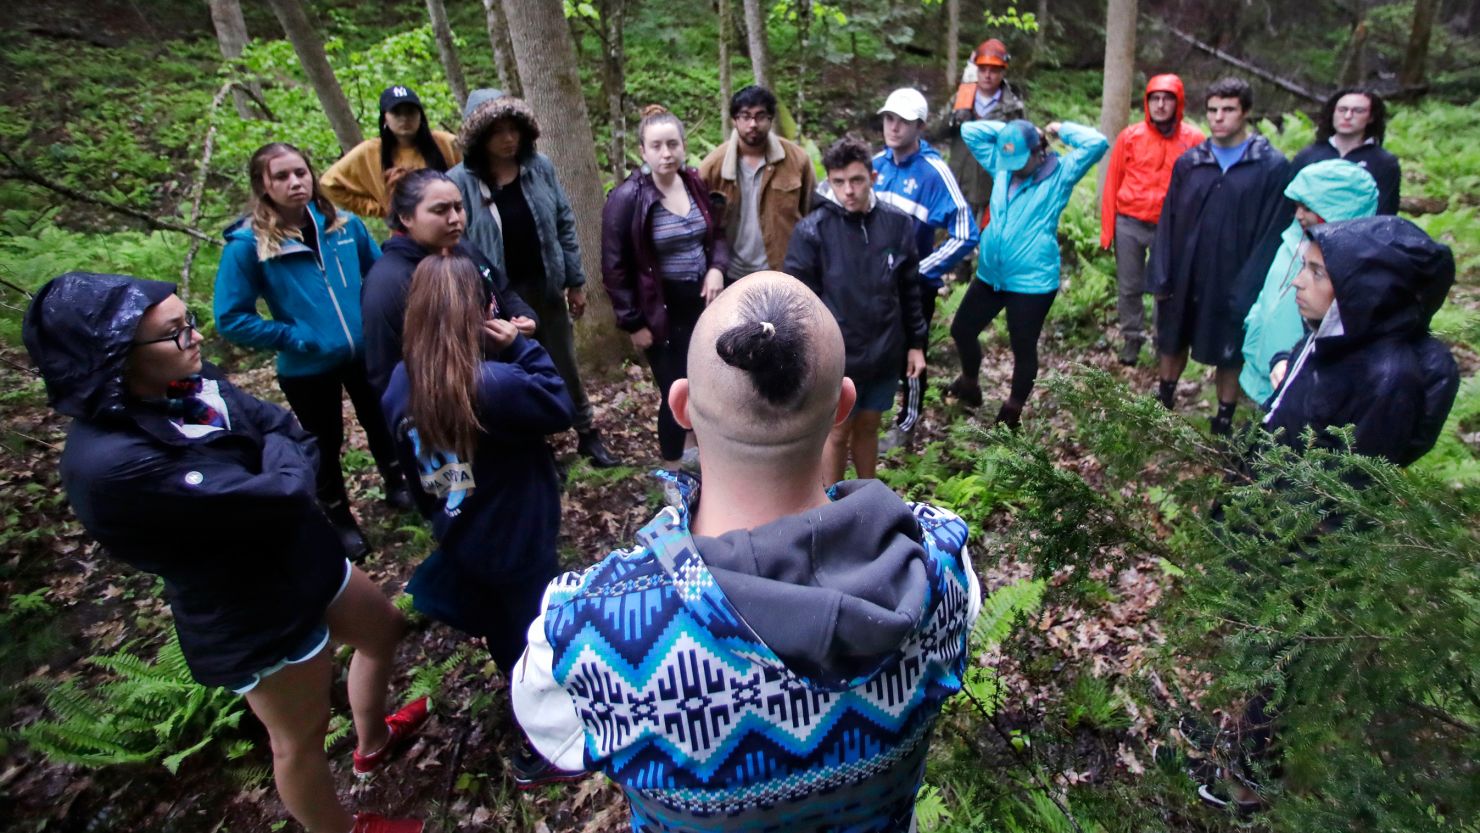 Native American basket maker Geo Neptune, of the Passamaquoddy tribe in Indian Township, Maine, center, talks with students before selecting a tree to cut during an outdoor class at Dartmouth College in May 22, 2018.